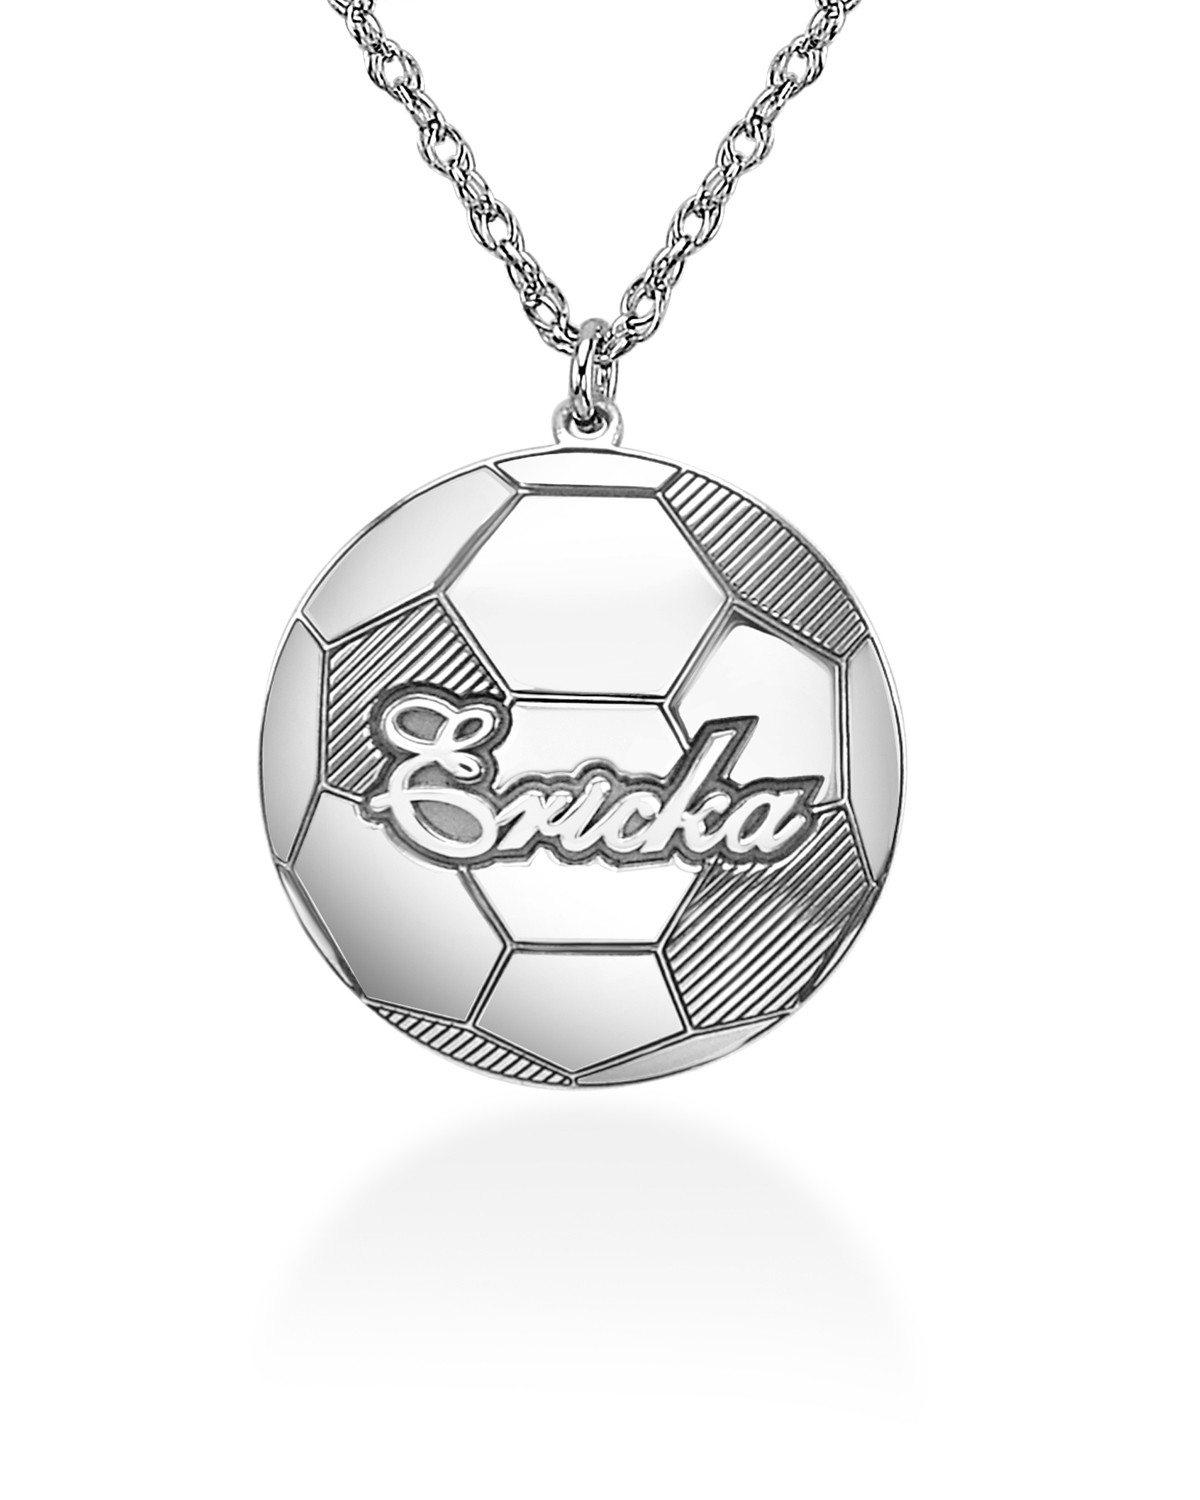 Girls Custom Soccer Jewelry Gifts for Soccer Players & Teams Soccer She Believed She Could So She Did Necklace with Letter Charm 